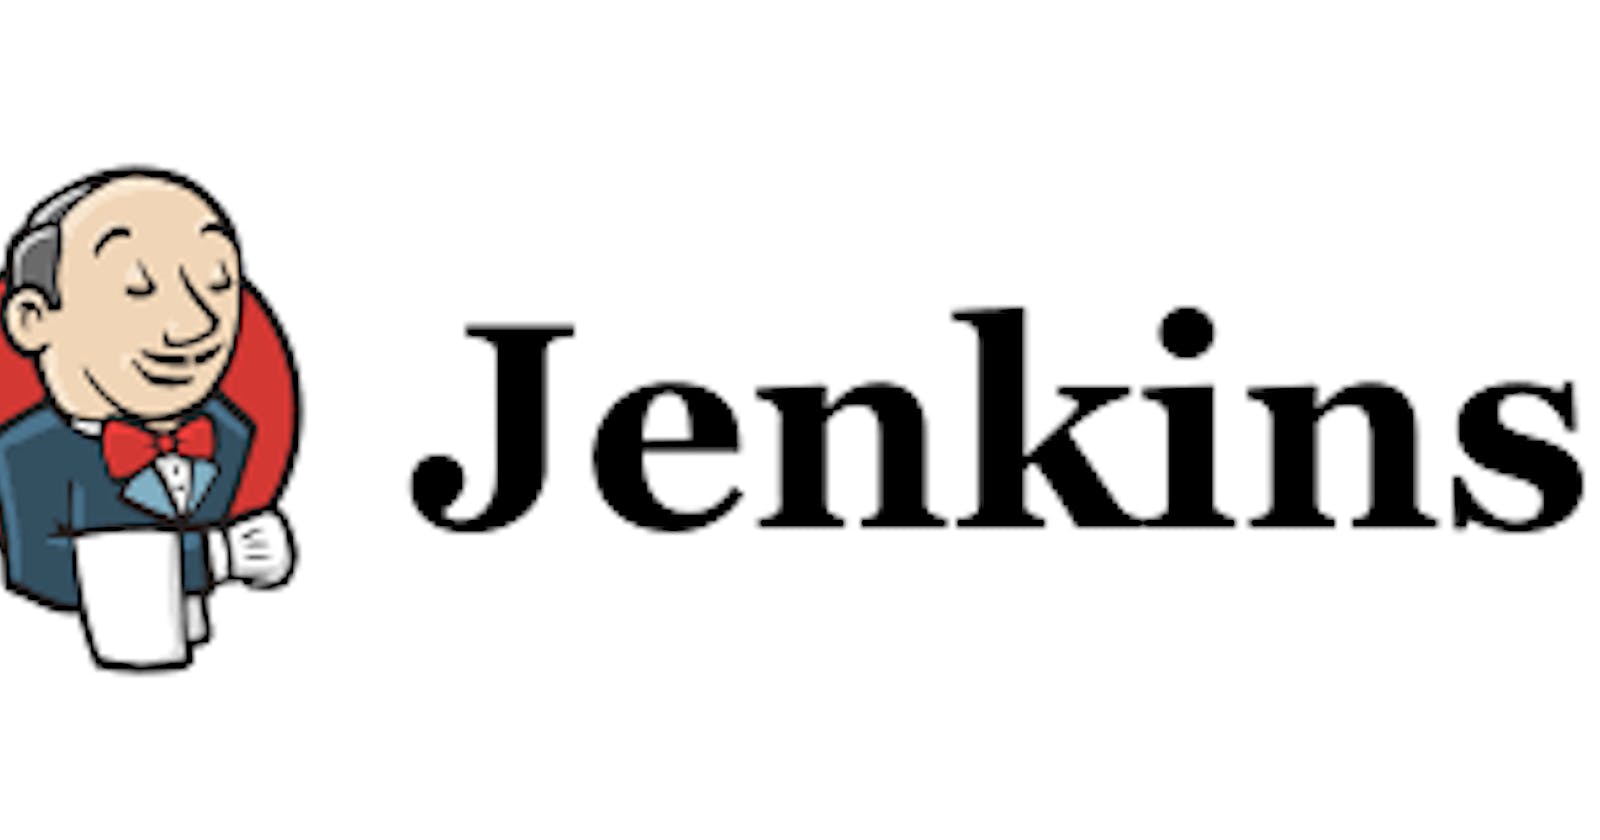 Day22:Getting Started with Jenkins